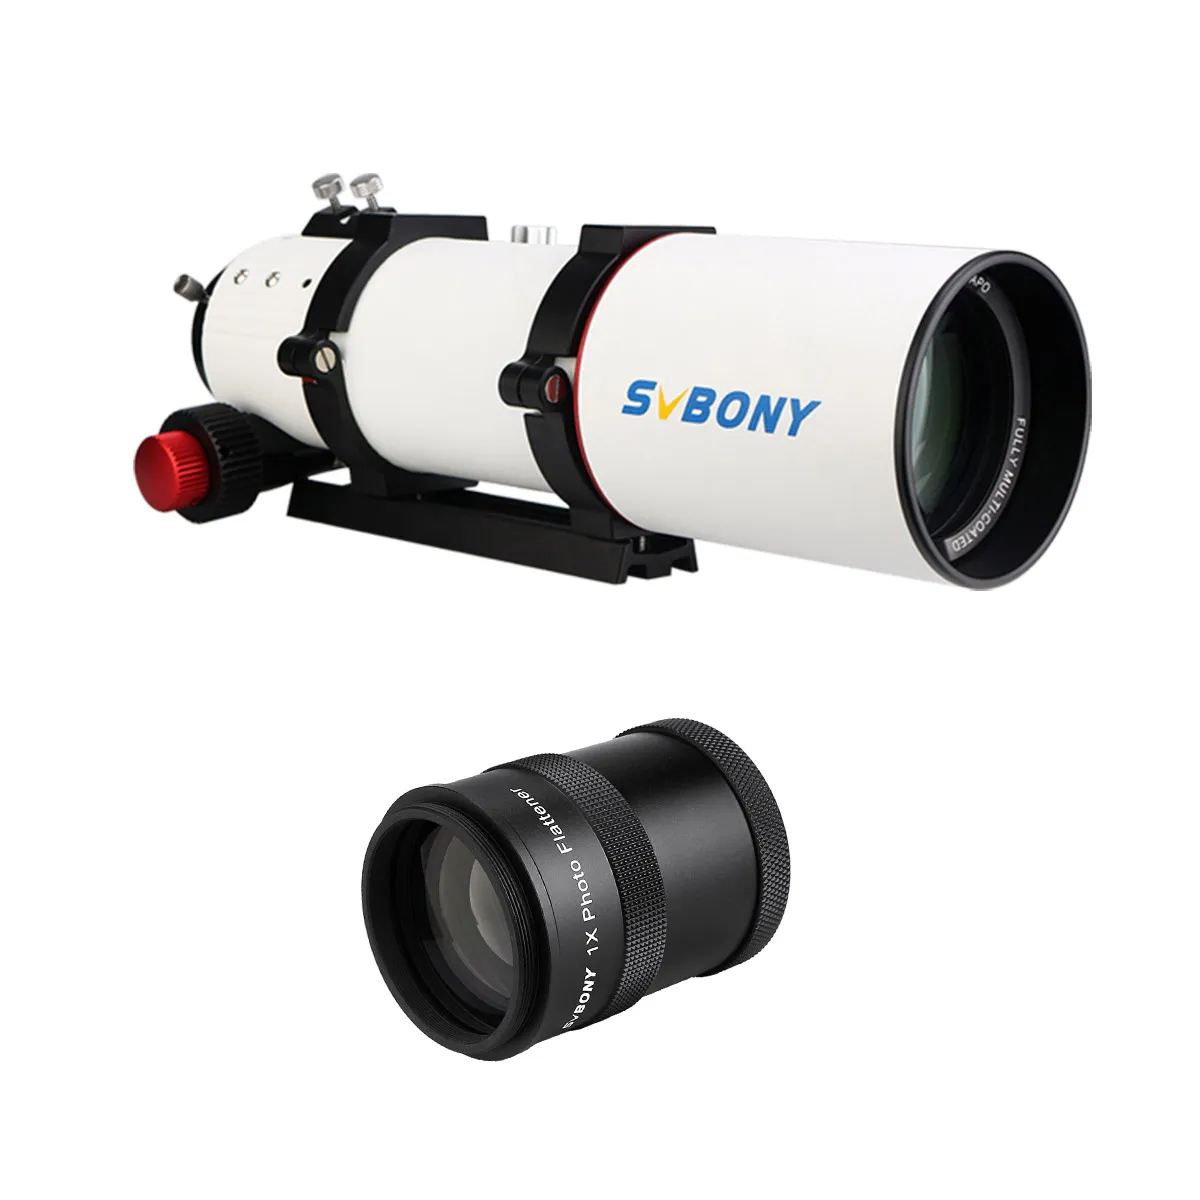 SV550 80 APO Telescope Refractor - SV209 1.0x Field Flattener Set for Astronomical Observation and Photography